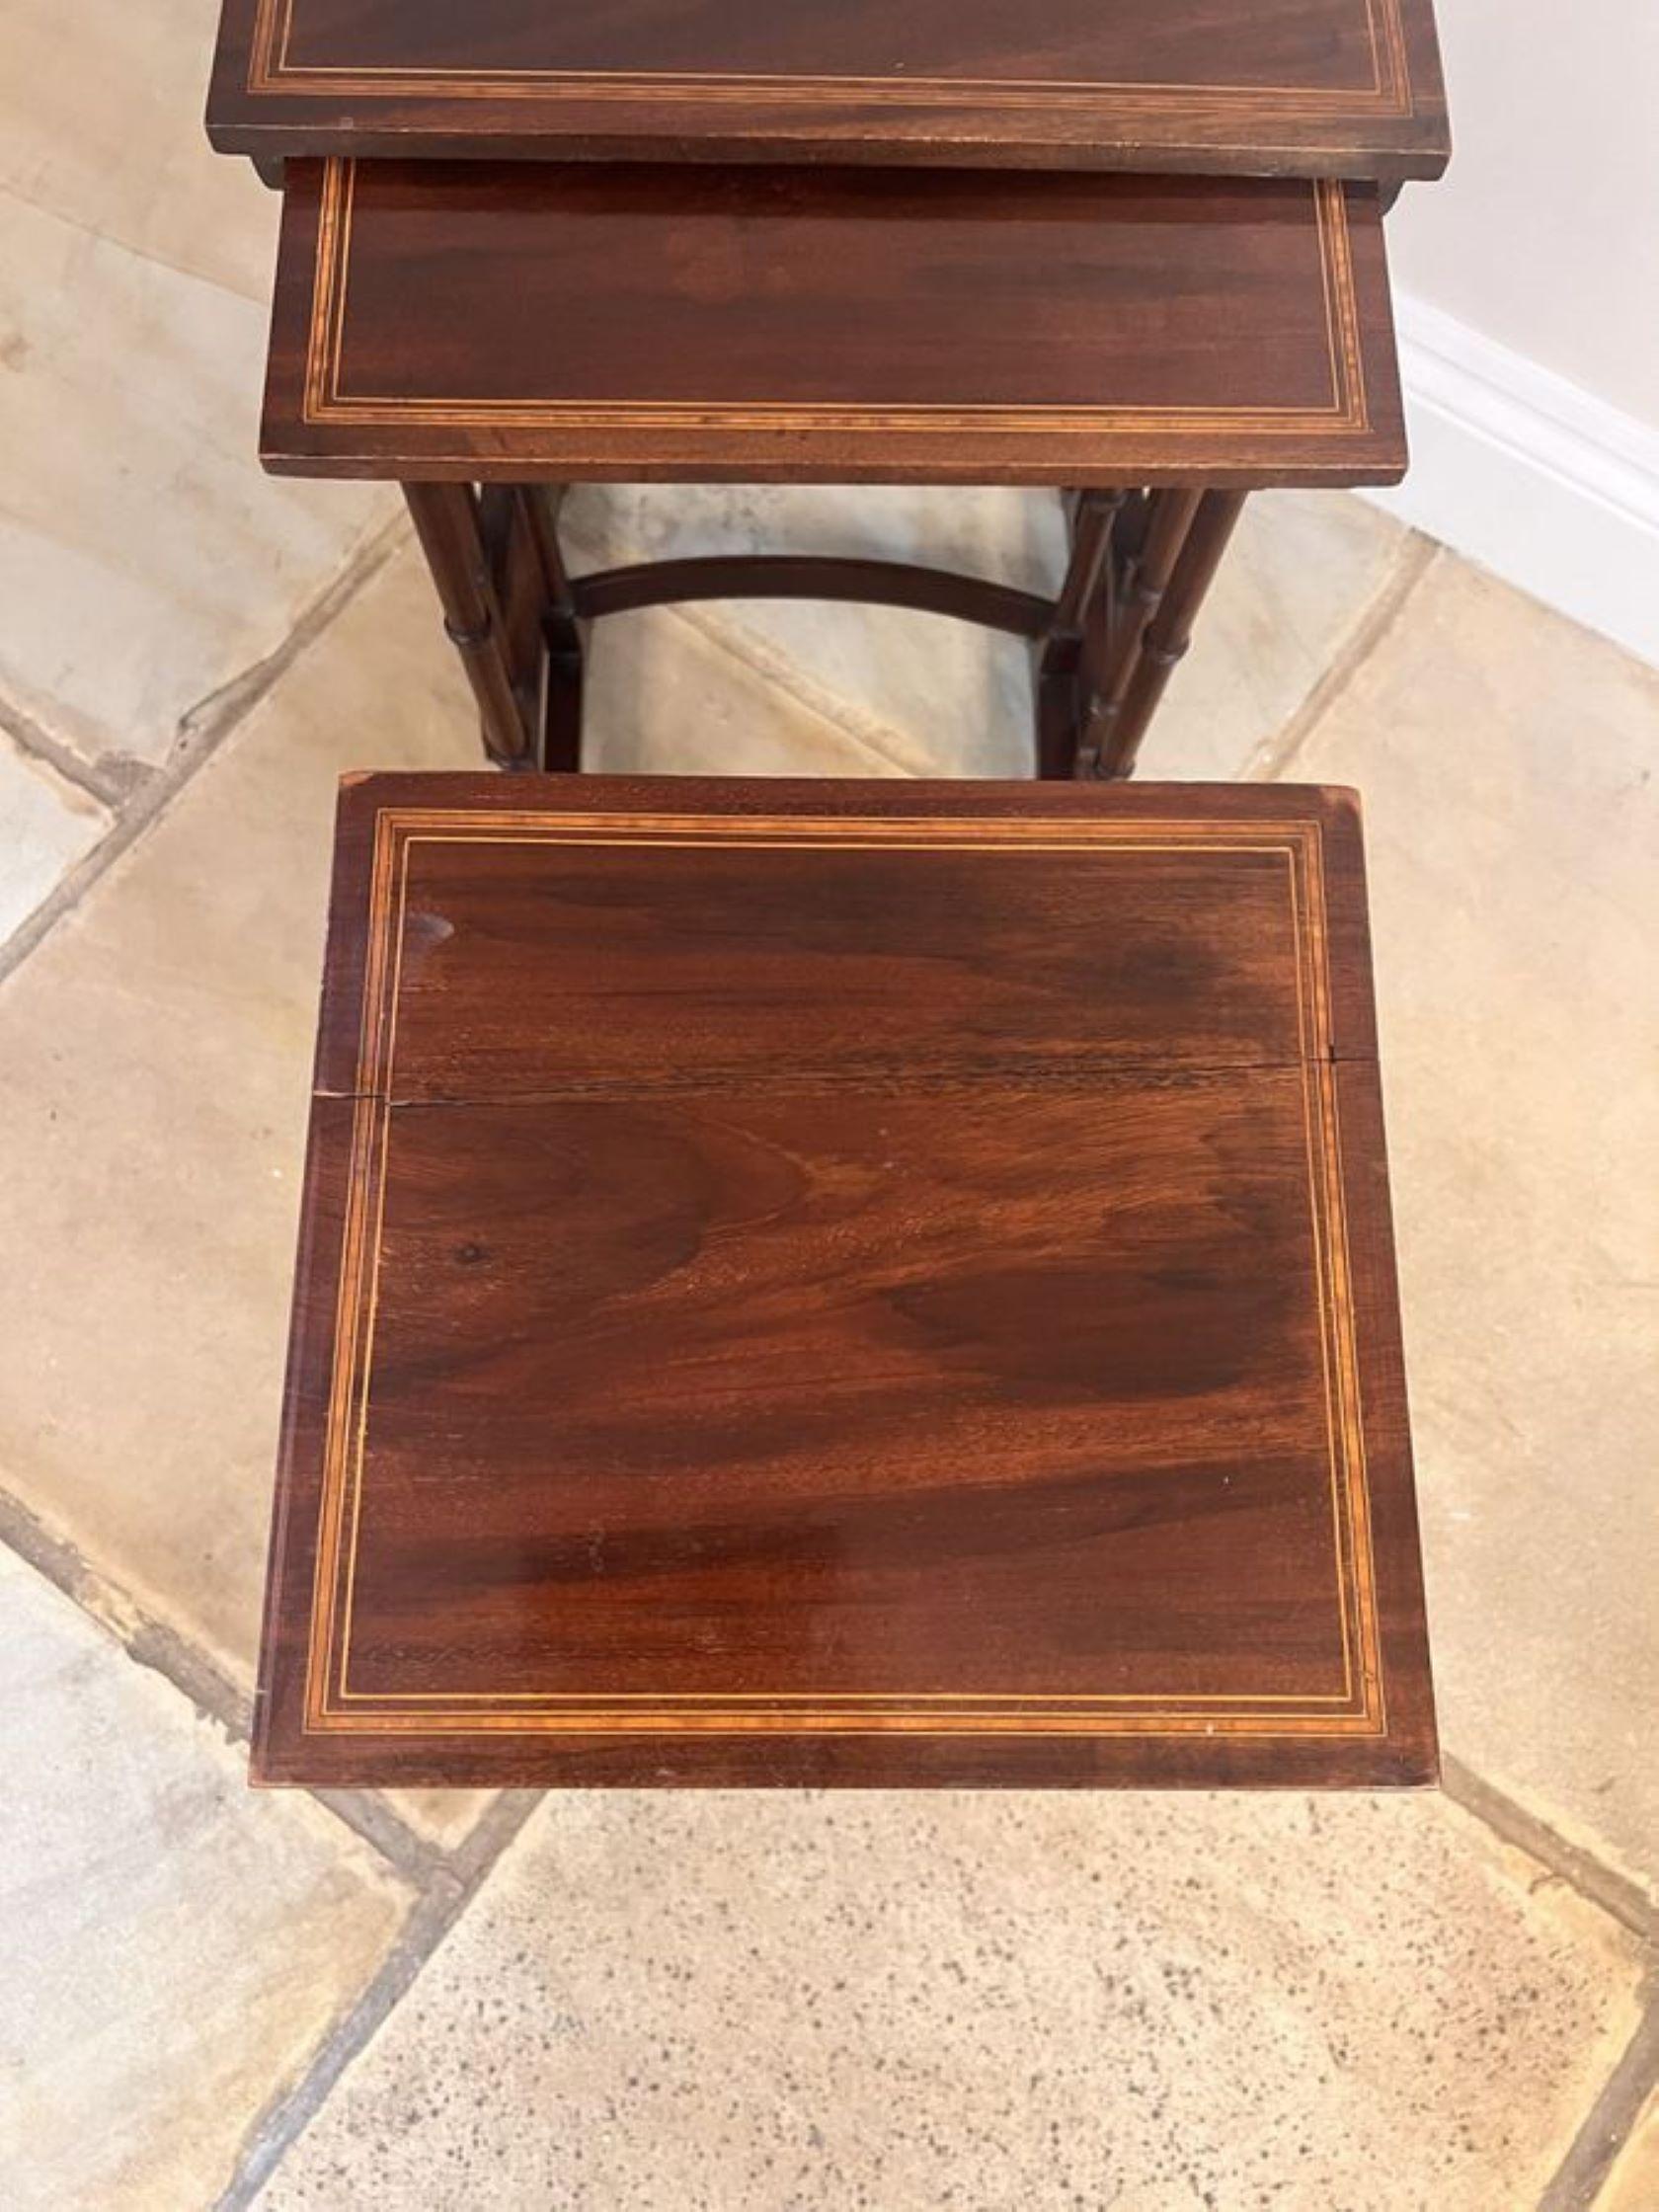 Lovely antique Edwardian mahogany nest of four tables, having a quality nest of four mahogany and satin wood cross banded occasional tables supported by turned columns standing on shaped feet united by a mahogany stretcher.

D. 1900